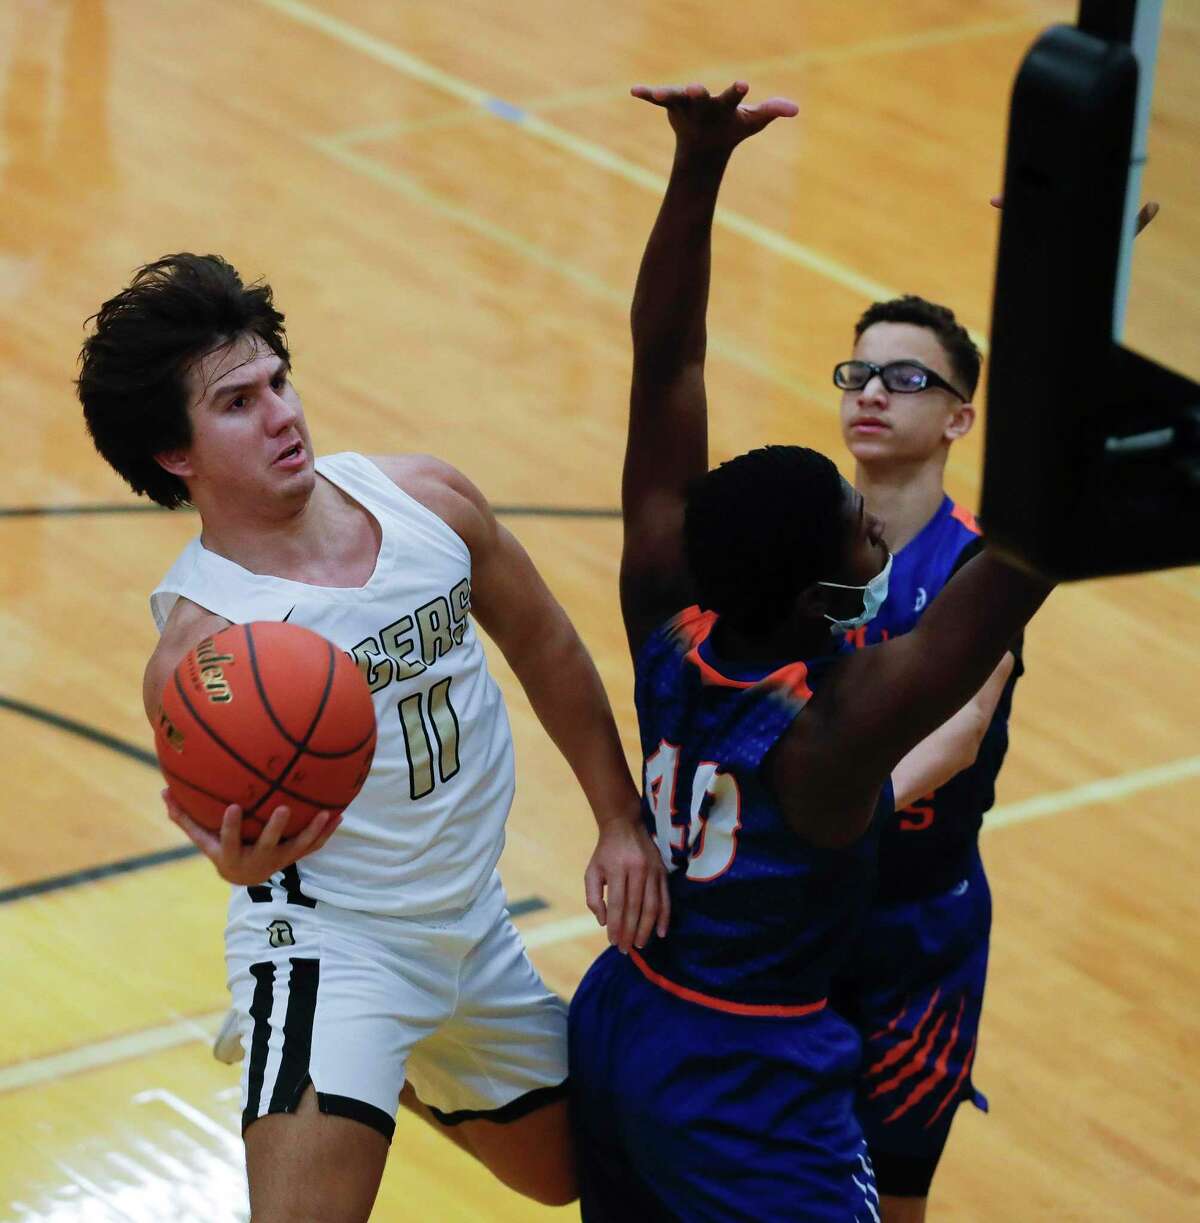 Conroe’s Layne O’Dell (11) scoops the ball around Grand Oaks’ Ahmad Smith (40) during the first quarter of a District 13-6A high school basketball game at Conroe High School, Wednesday, Jan. 13, 2021, in Conroe.